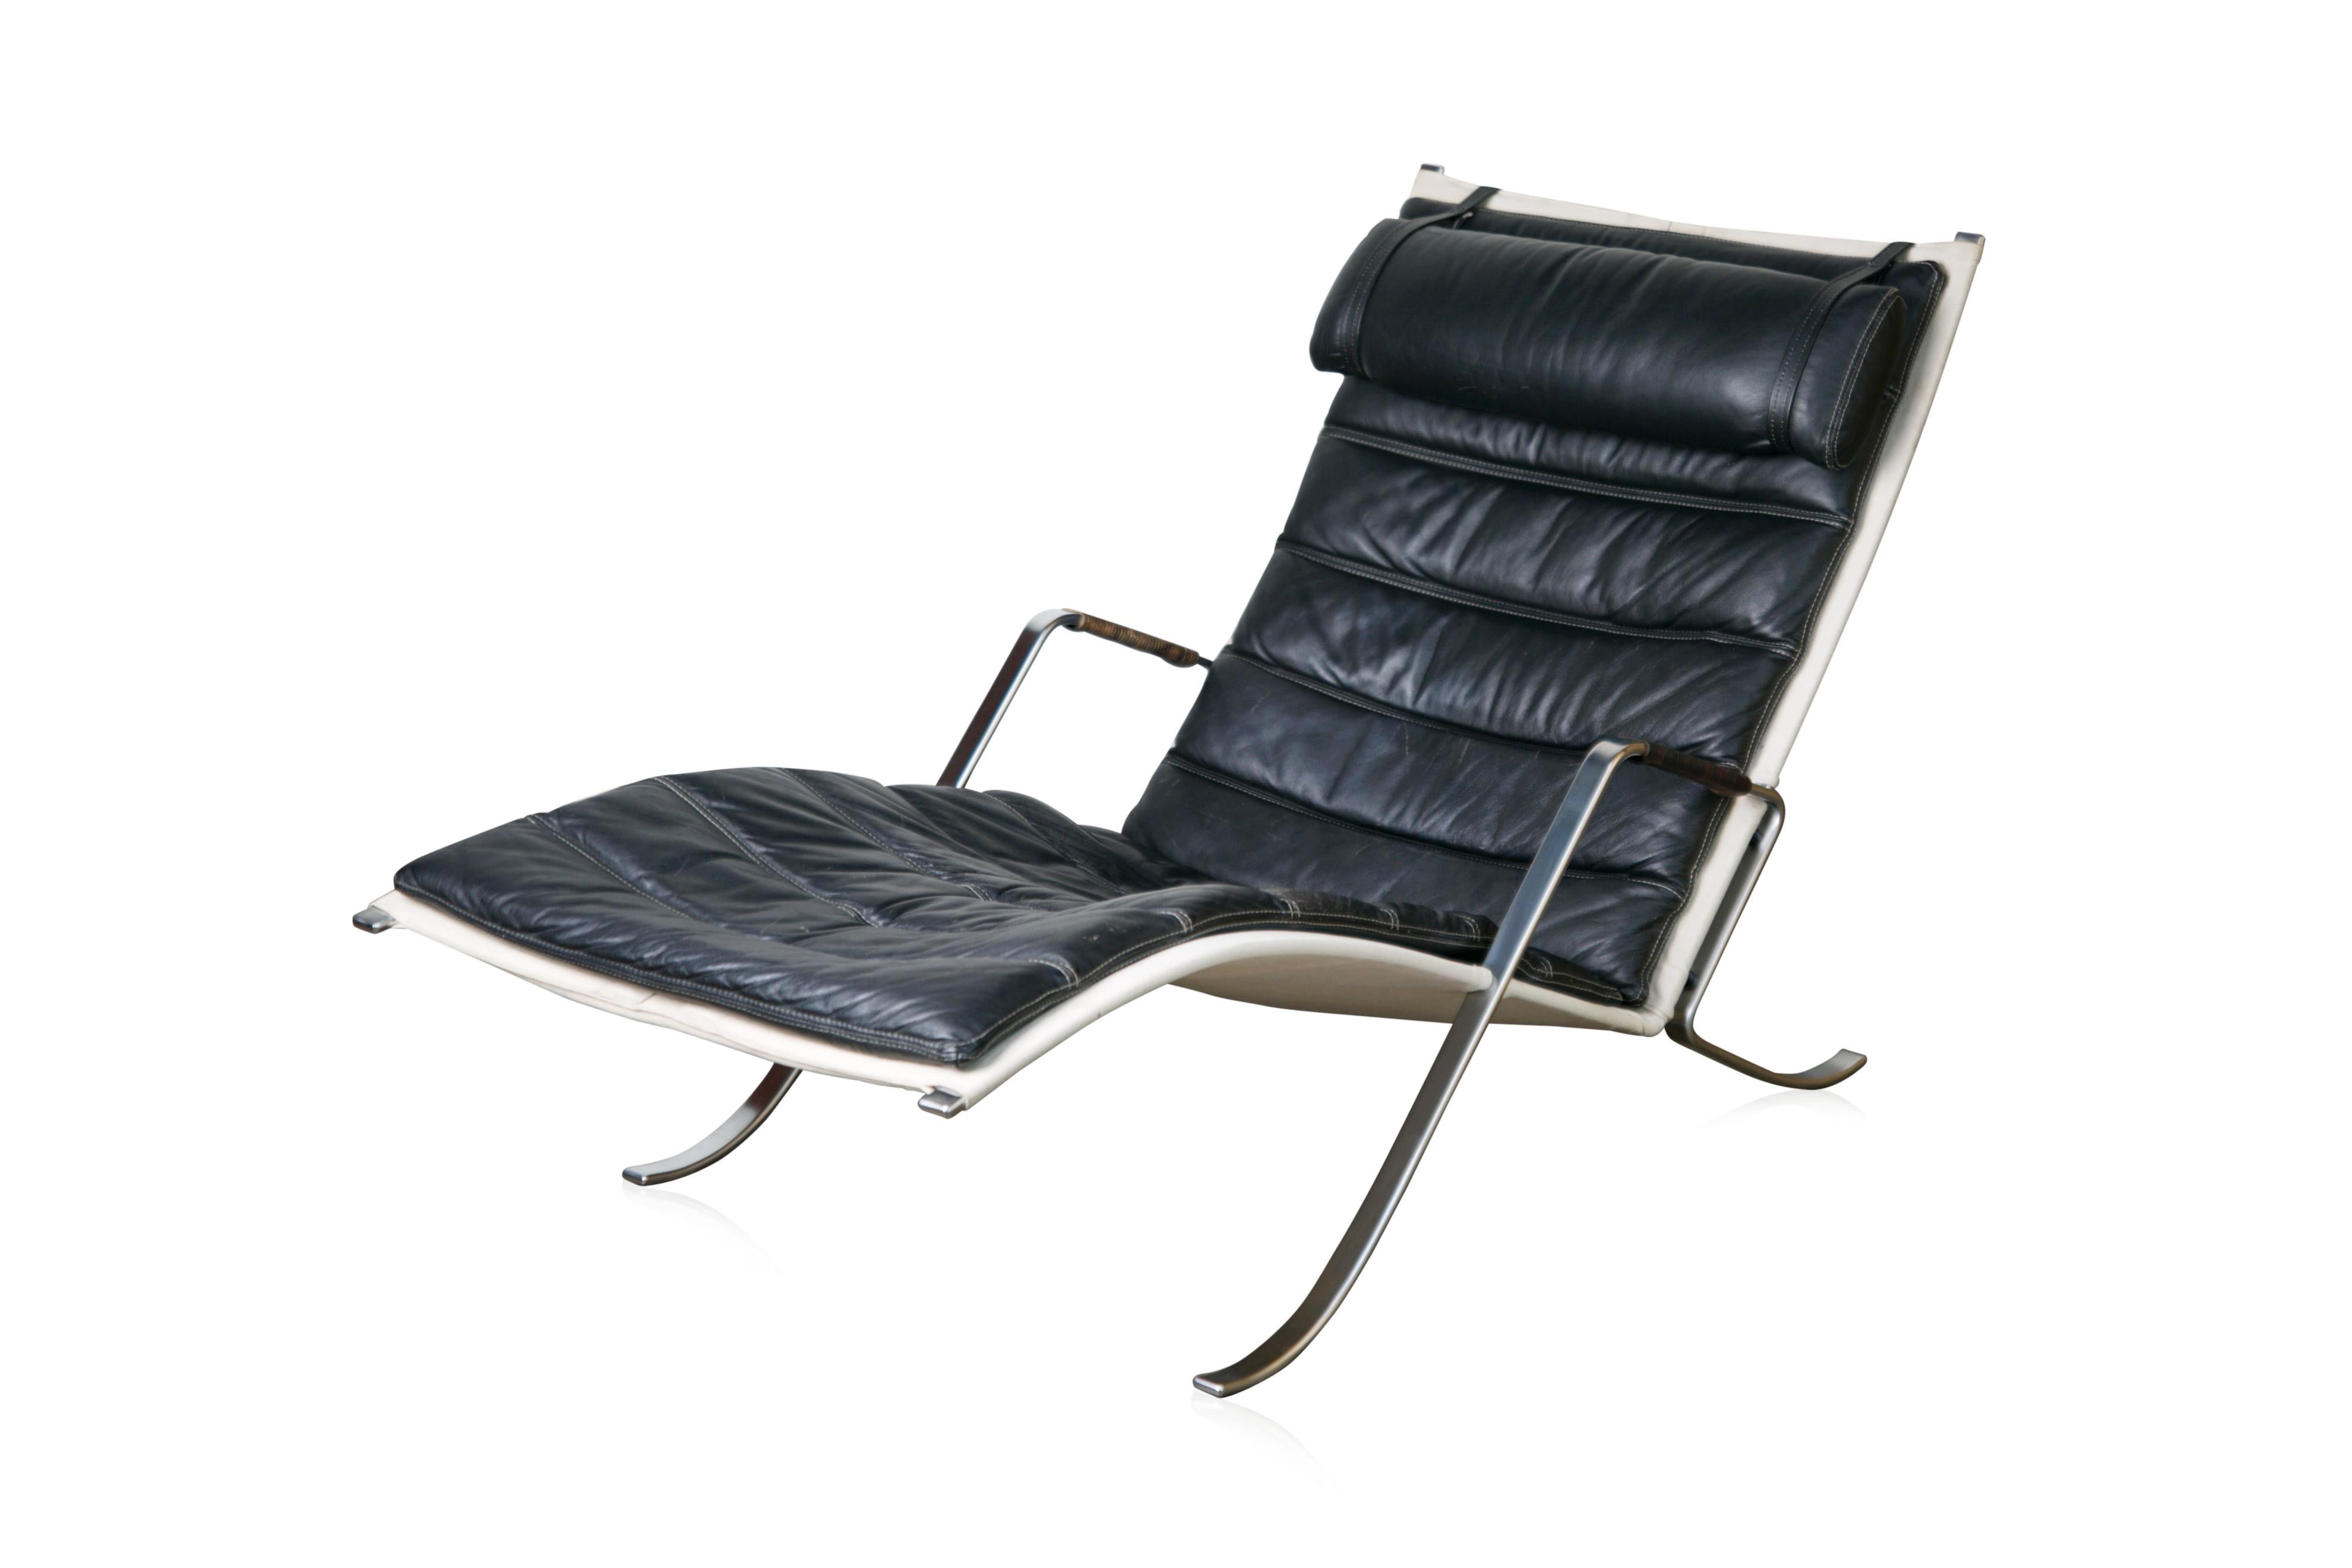 Stainless Steel FK-87 Grasshopper Chaise by Fabricius & Kastholm for Alfred Kill, circa 1960